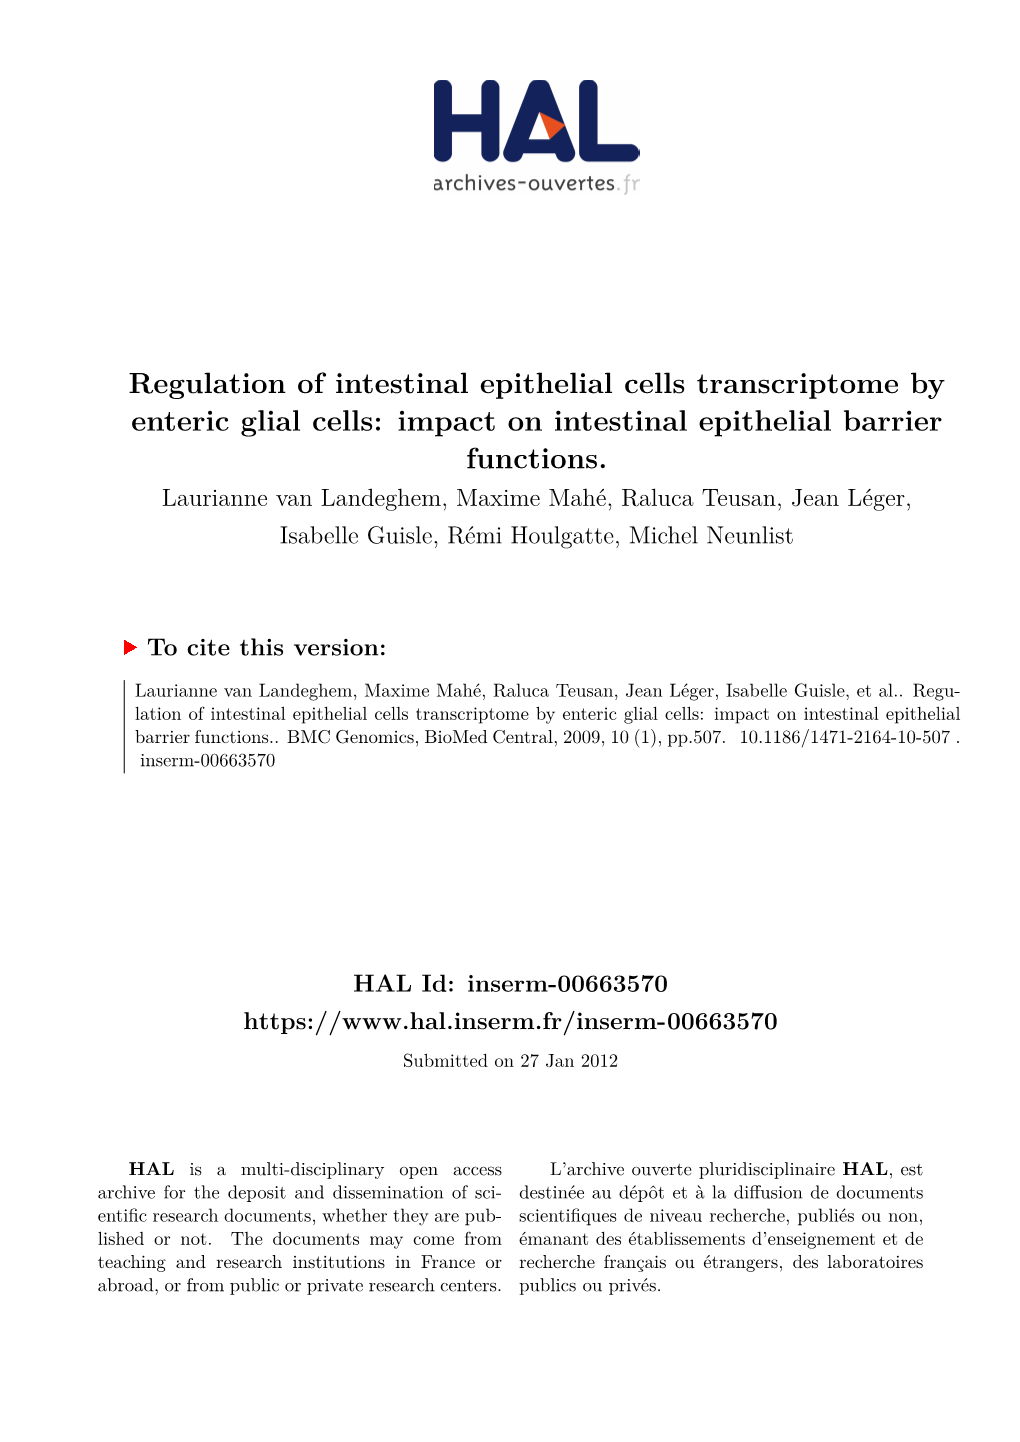 Regulation of Intestinal Epithelial Cells Transcriptome by Enteric Glial Cells: Impact on Intestinal Epithelial Barrier Functions